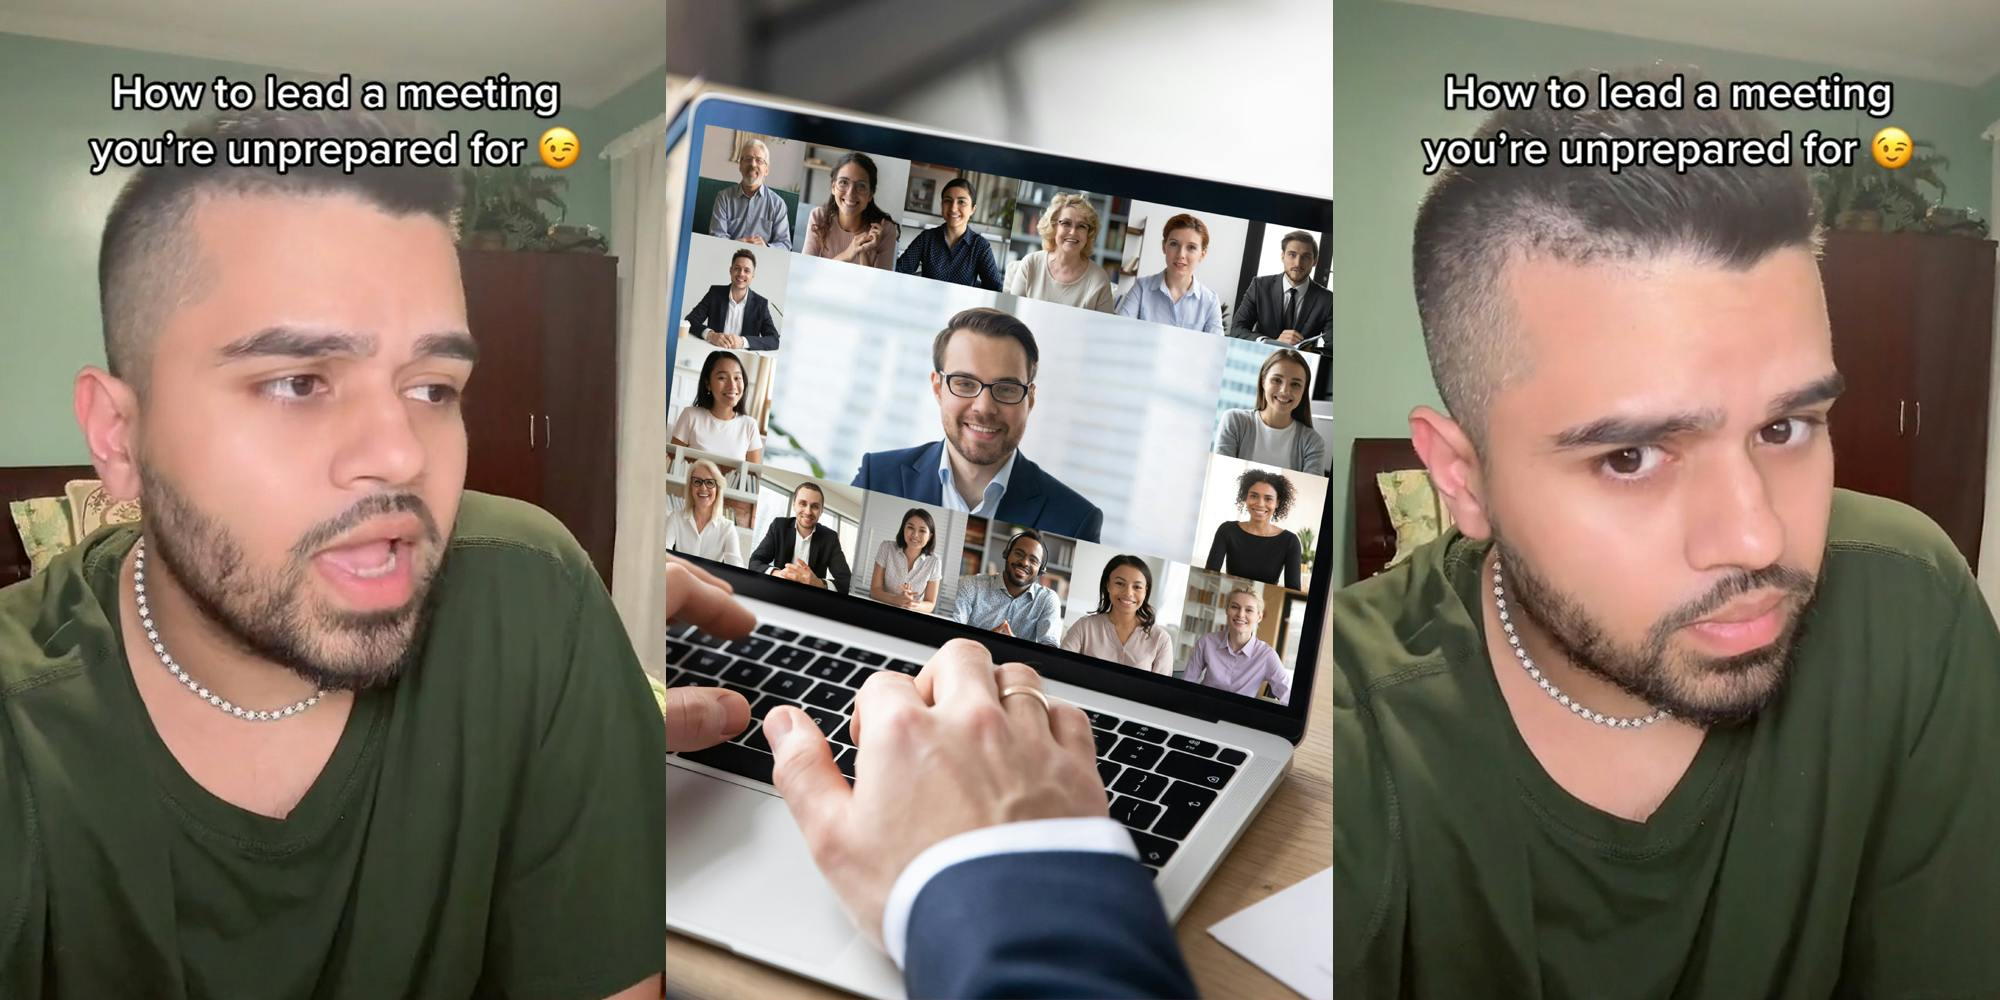 worker speaking with caption "How to lead a meeting you're unprepared for" (l) worker speaking for online work meeting (c) worker speaking with caption "How to lead a meeting you're unprepared for" (r)